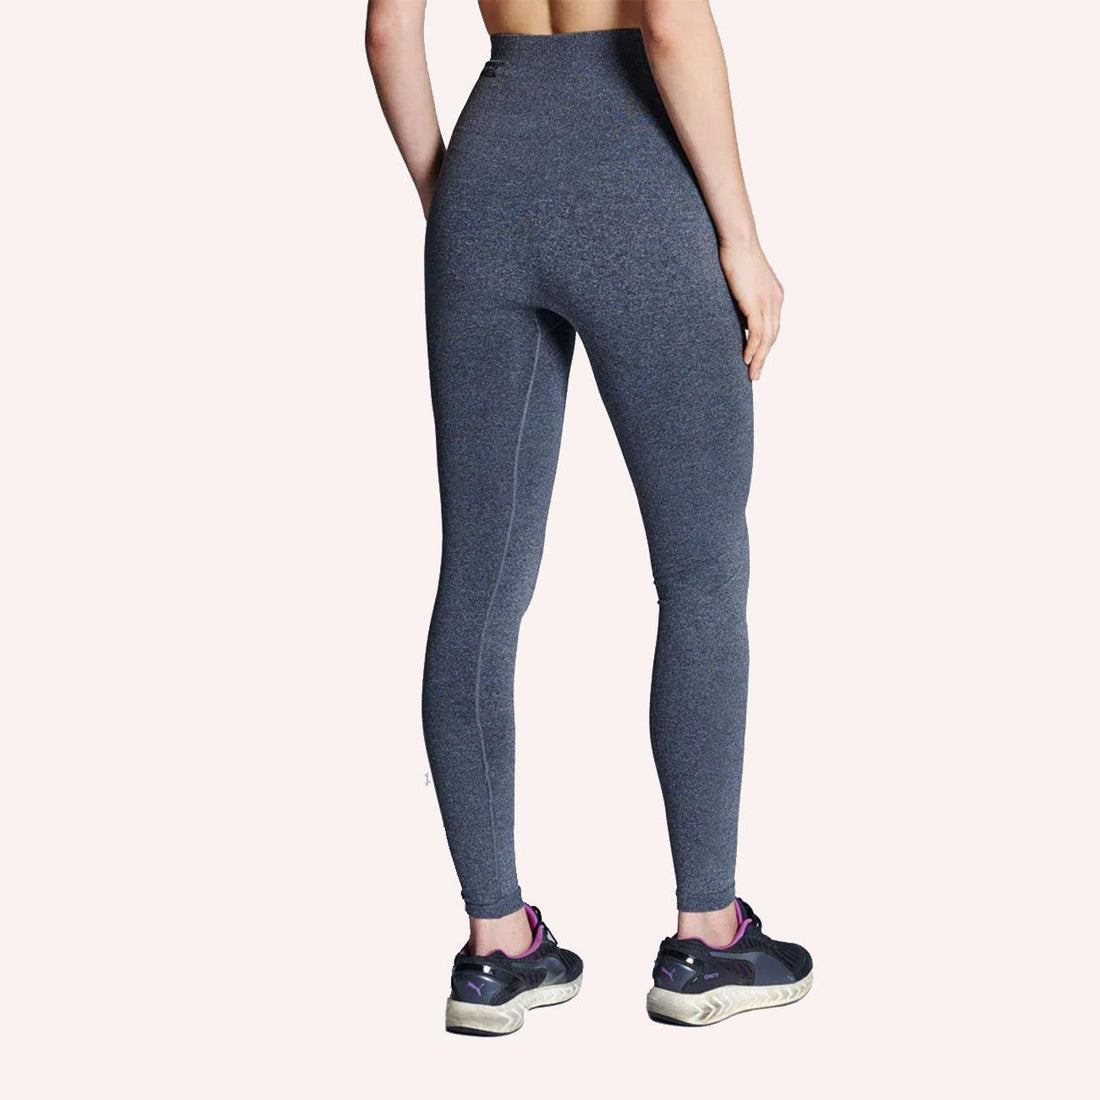 Patented Michelle Coretech Injury Recovery and Postpartum Compression Leggings - Grey Marle